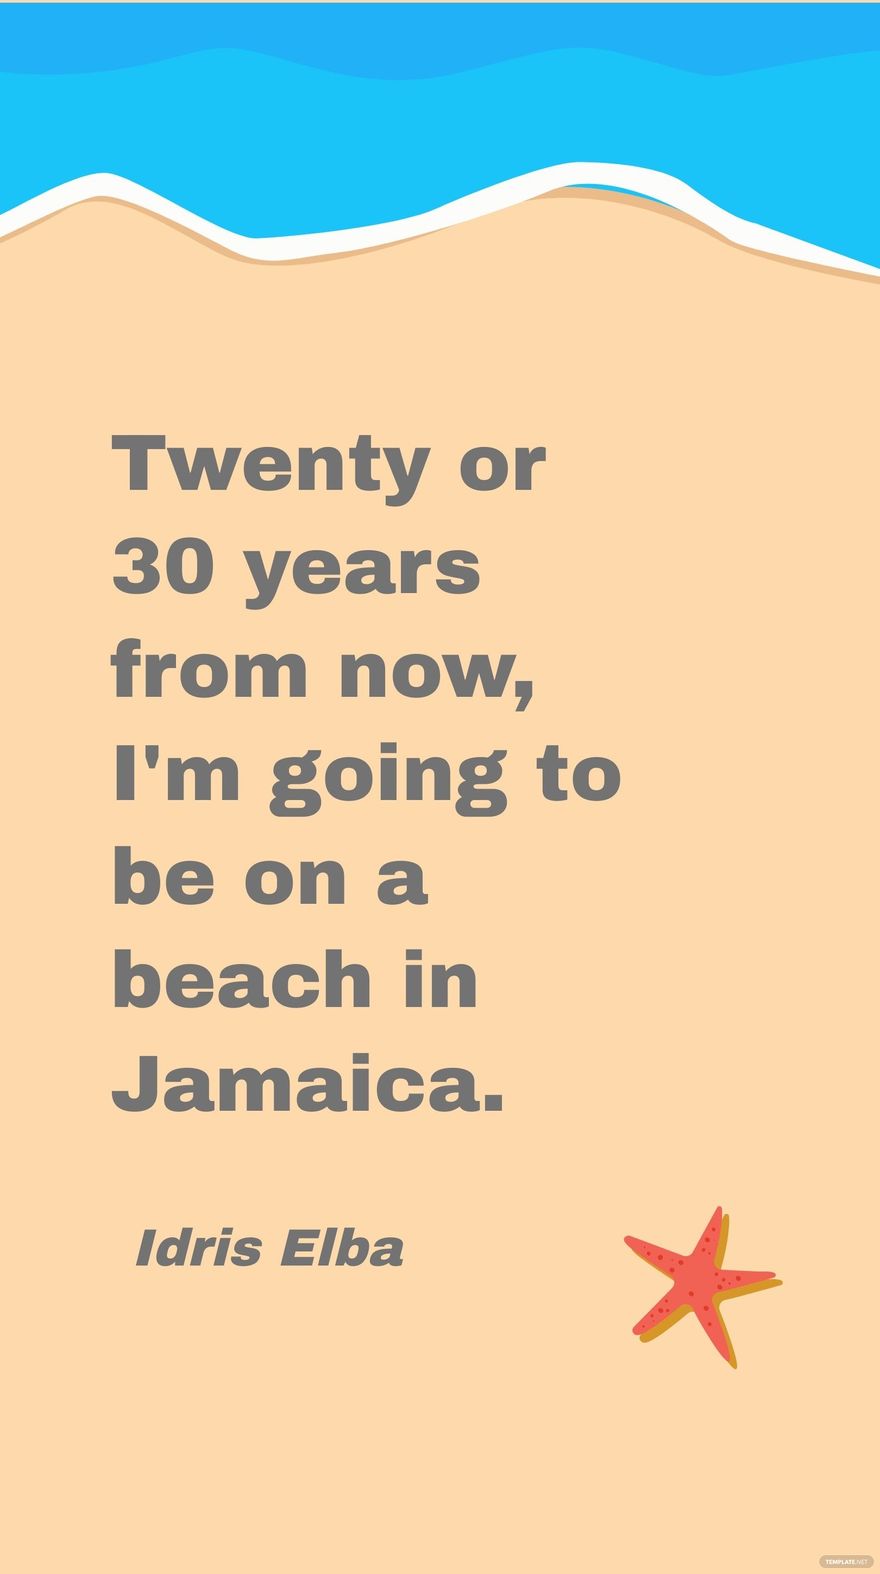 Free Idris Elba - Twenty or 30 years from now, I'm going to be on a beach in Jamaica.